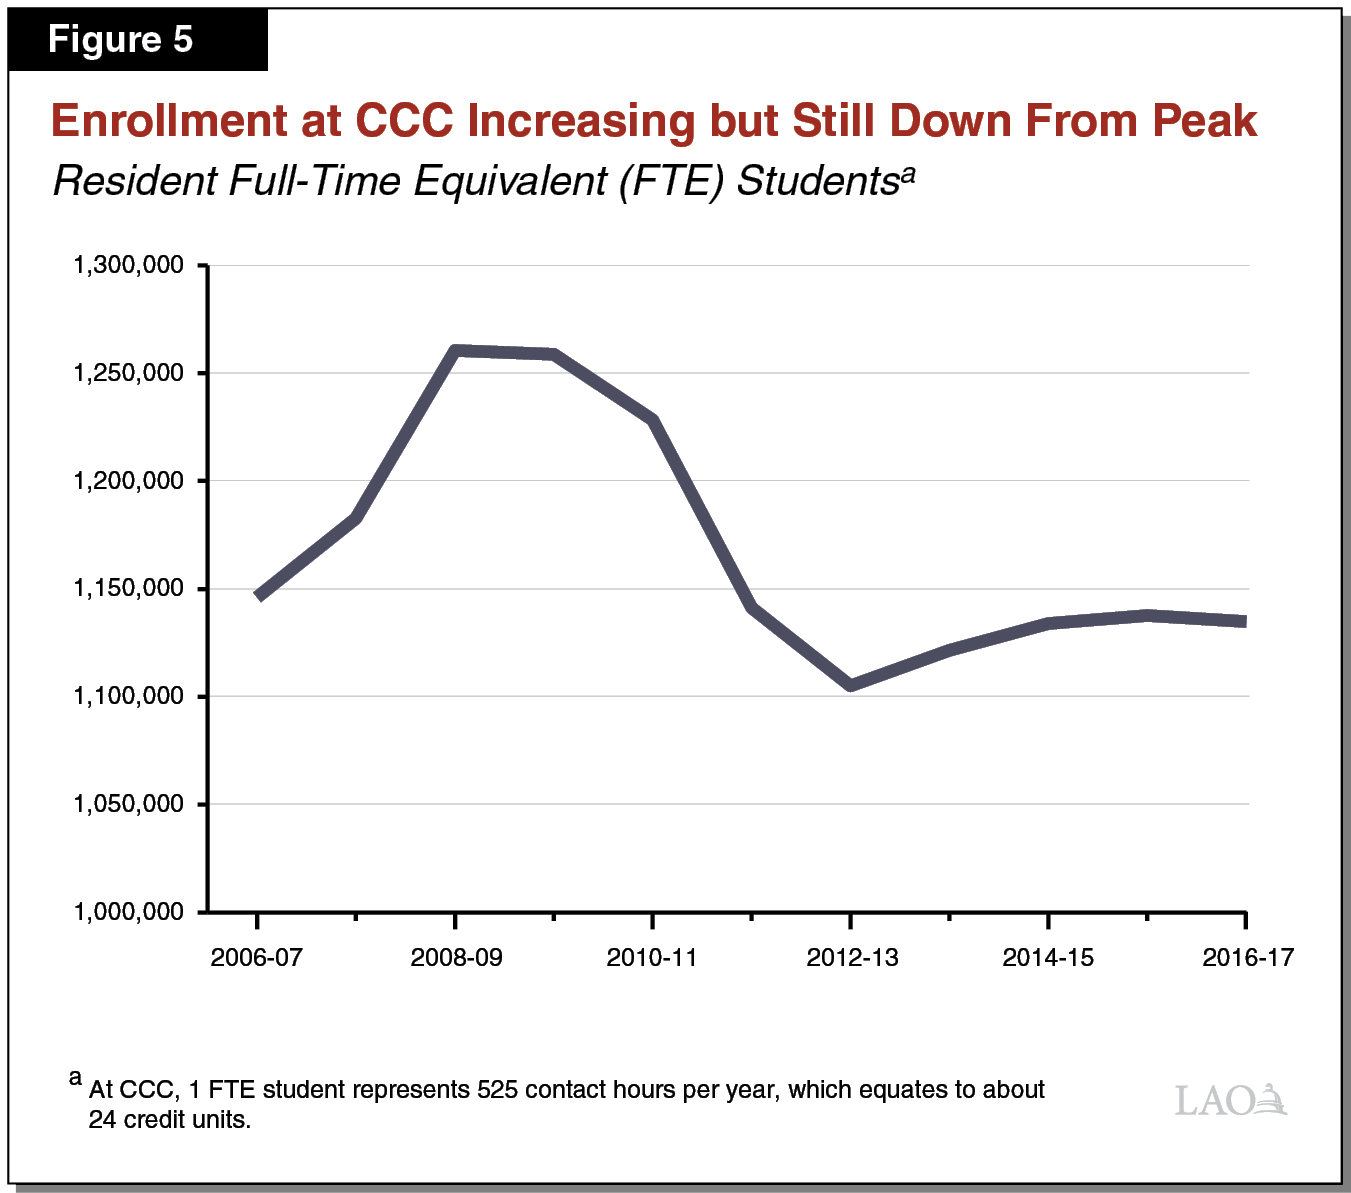 Figure 5 - Enrollment at CCC Increasing But Still Down from Peak